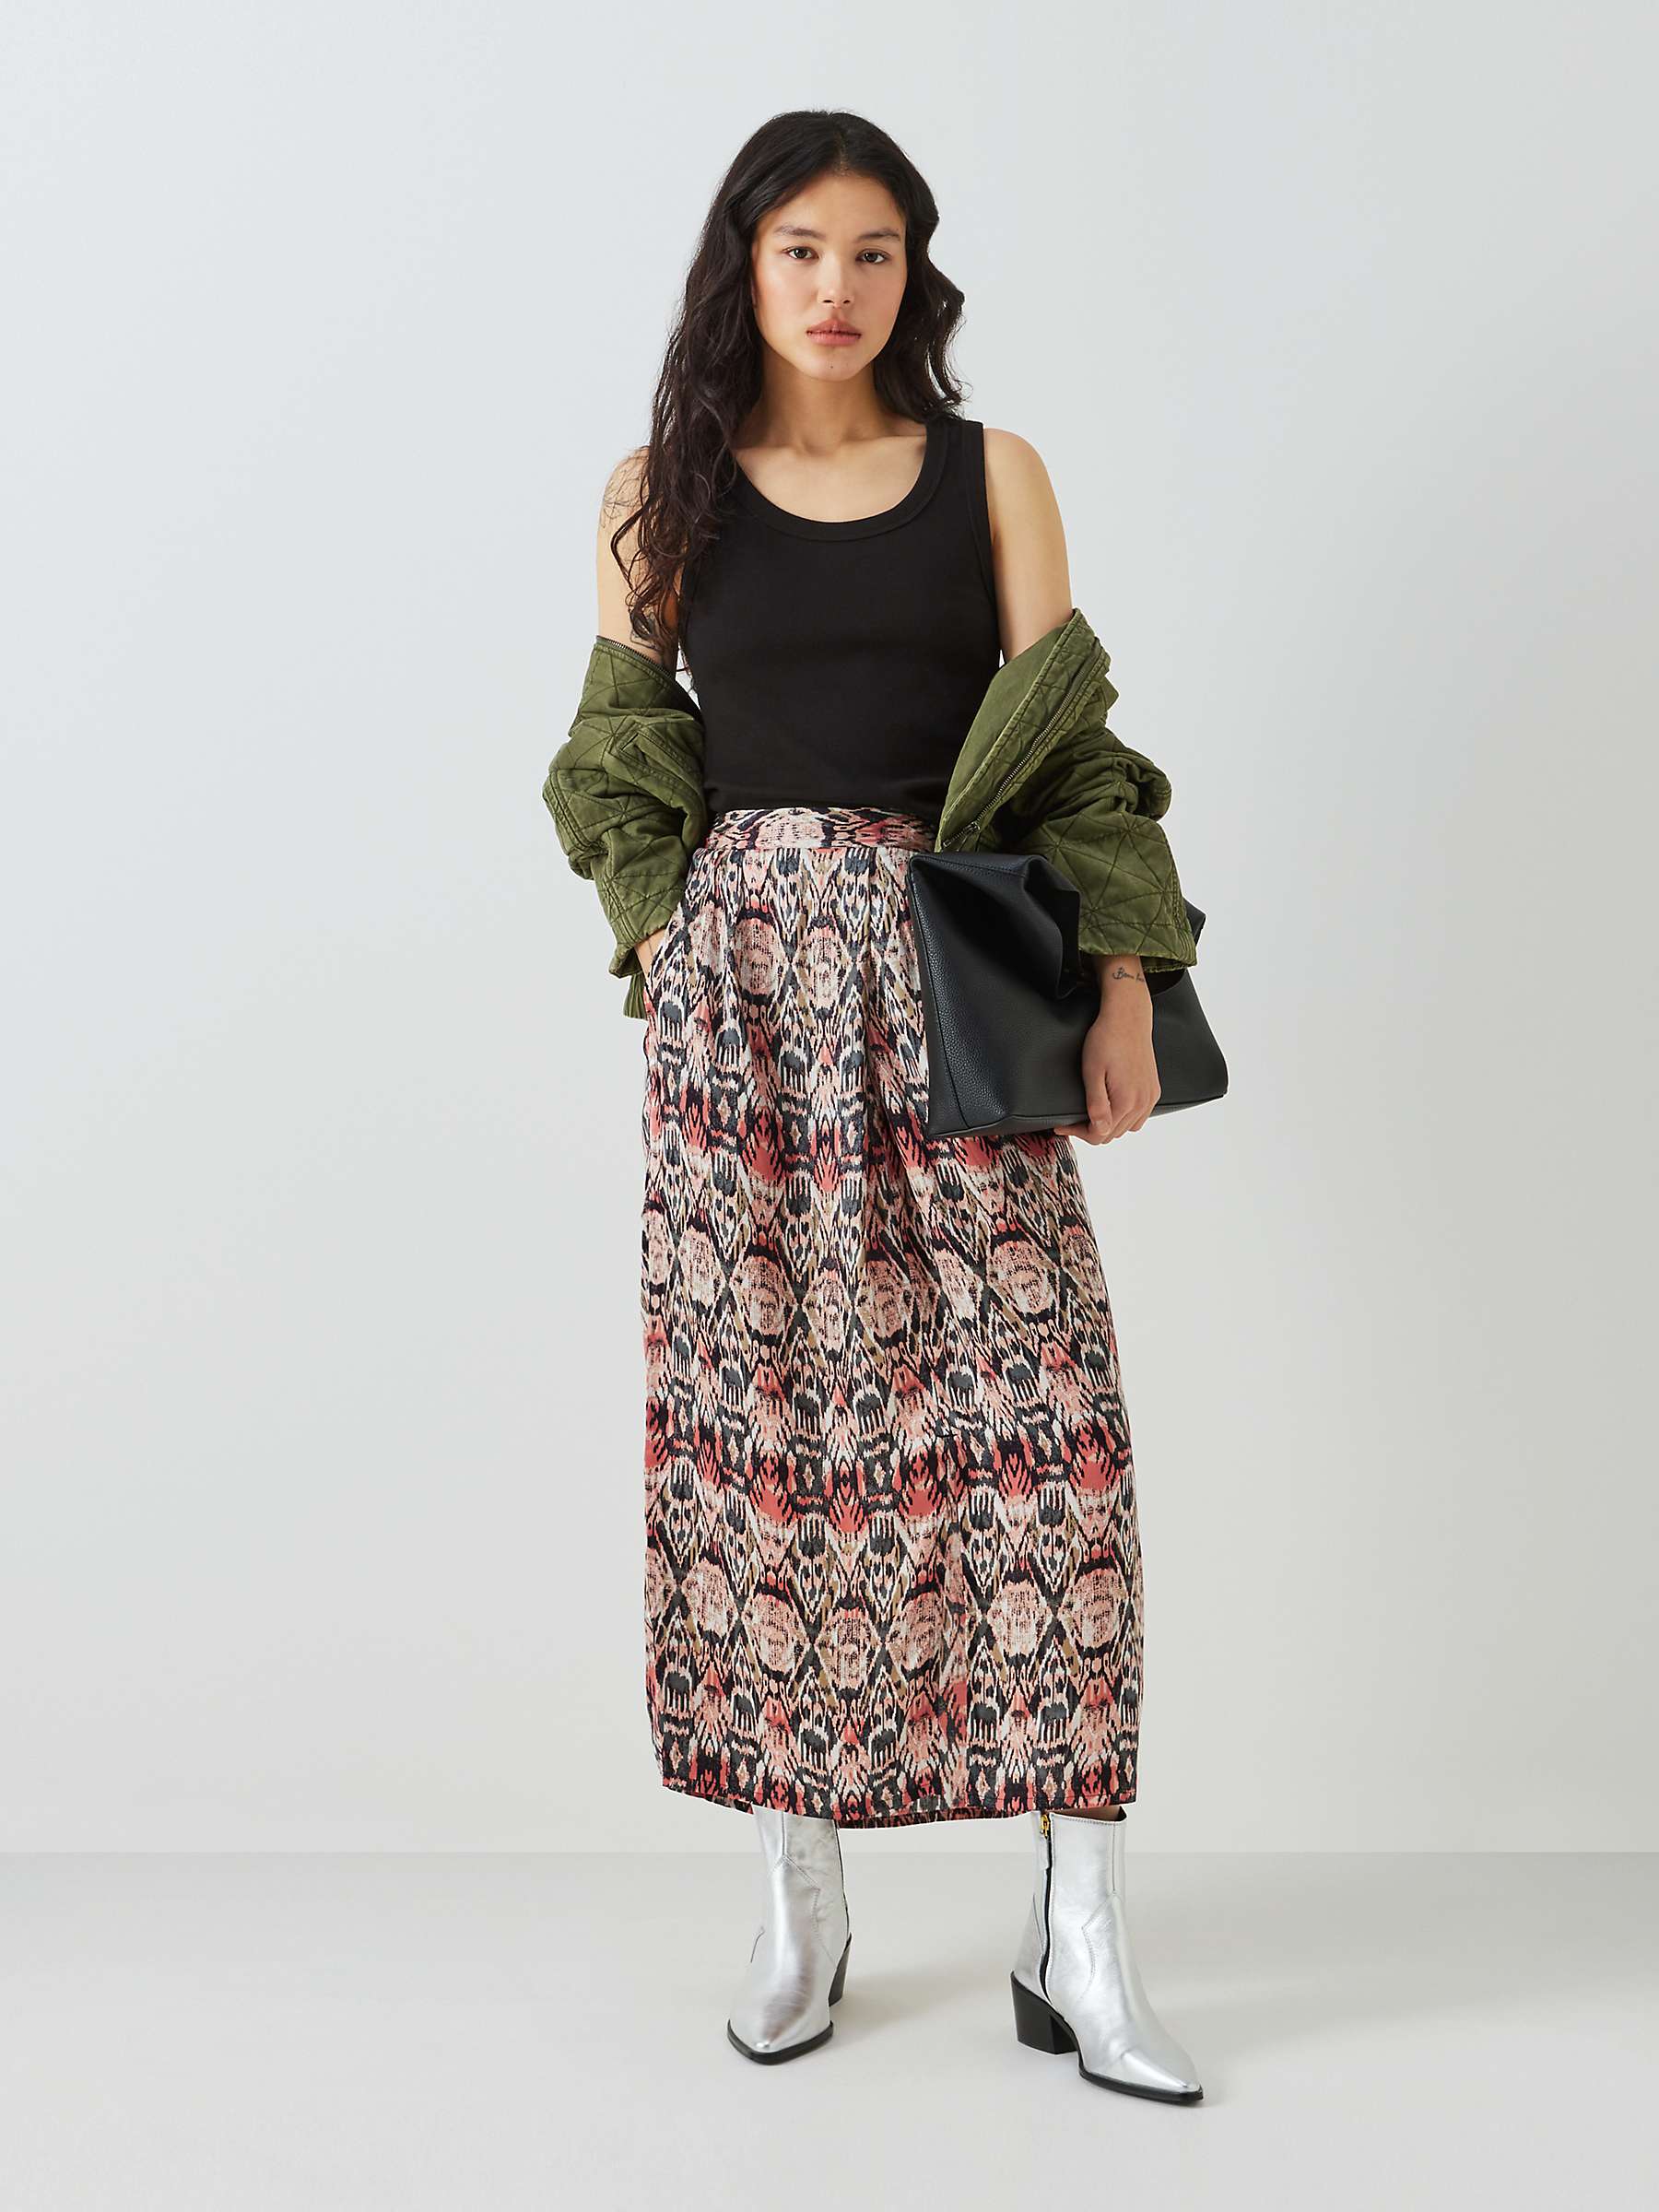 Buy AND/OR Catlin Ikat Midi Skirt, Coral Online at johnlewis.com